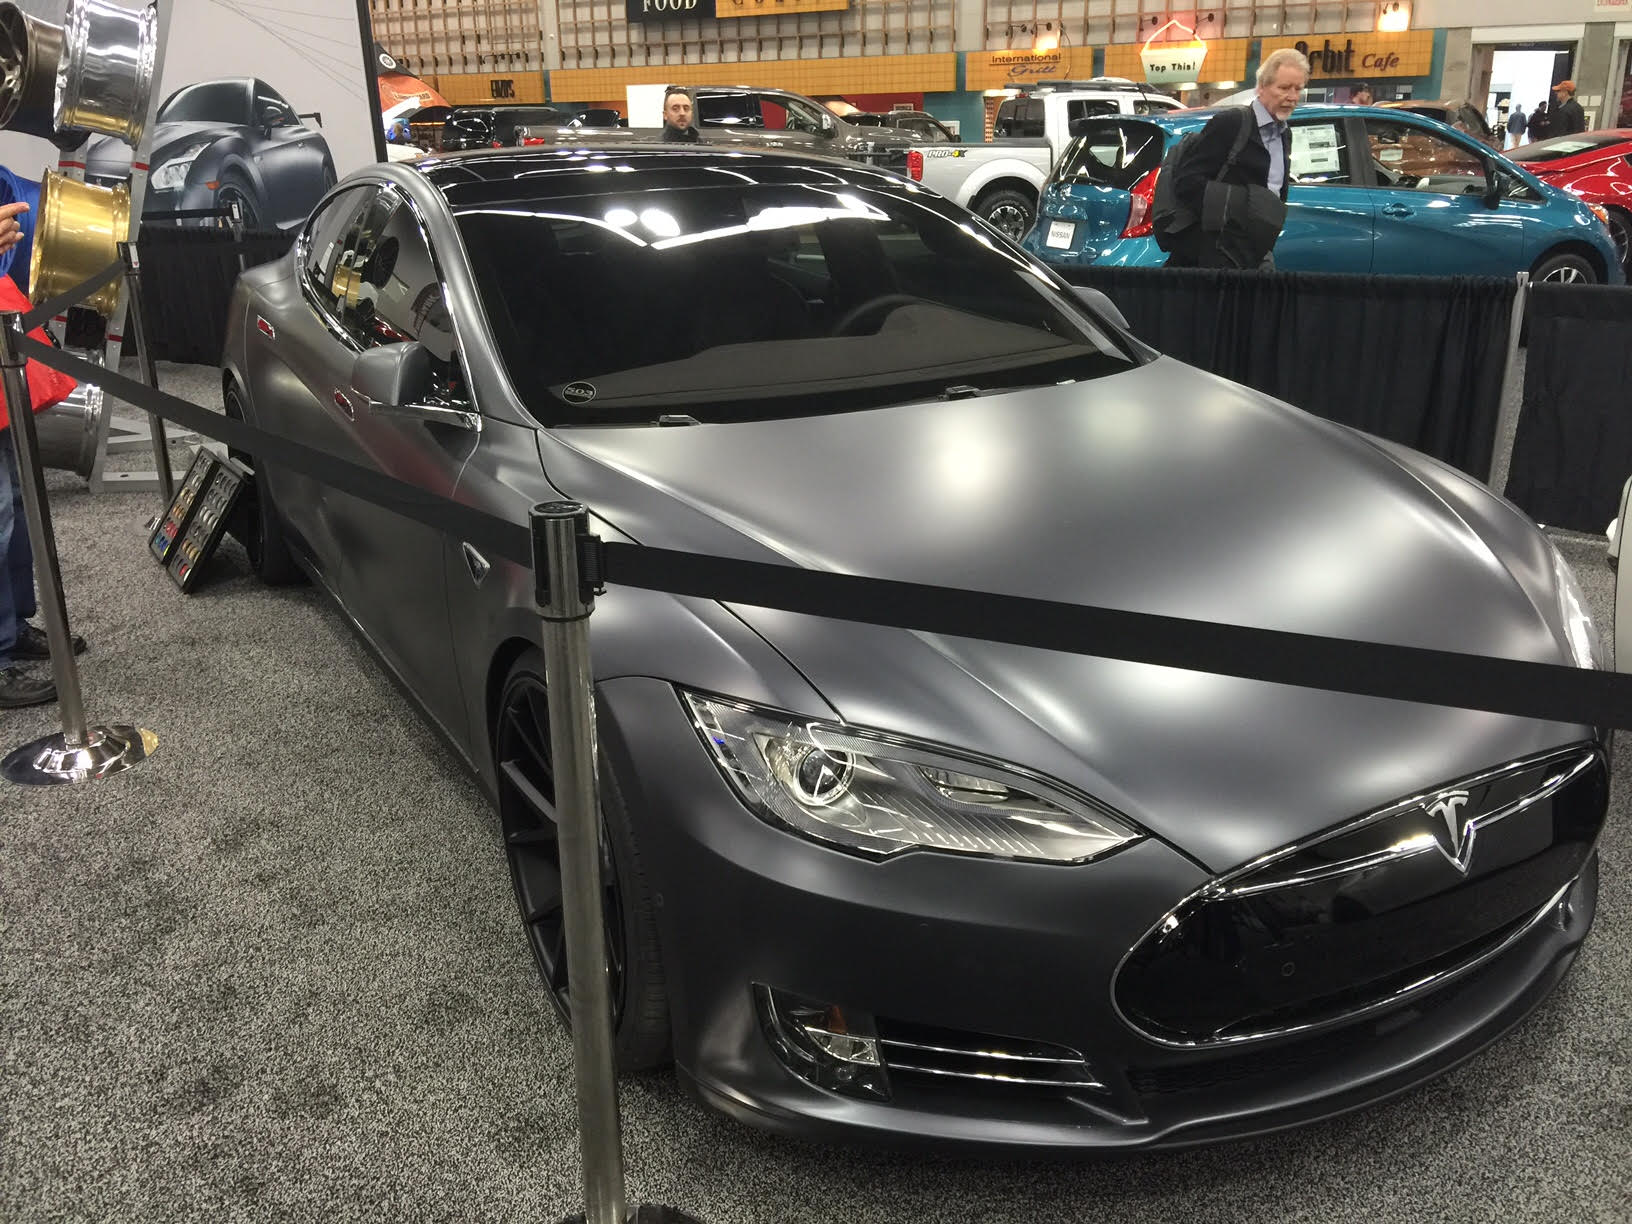 Tesla Model S tricked out by 503 Motoring at the Portland Auto